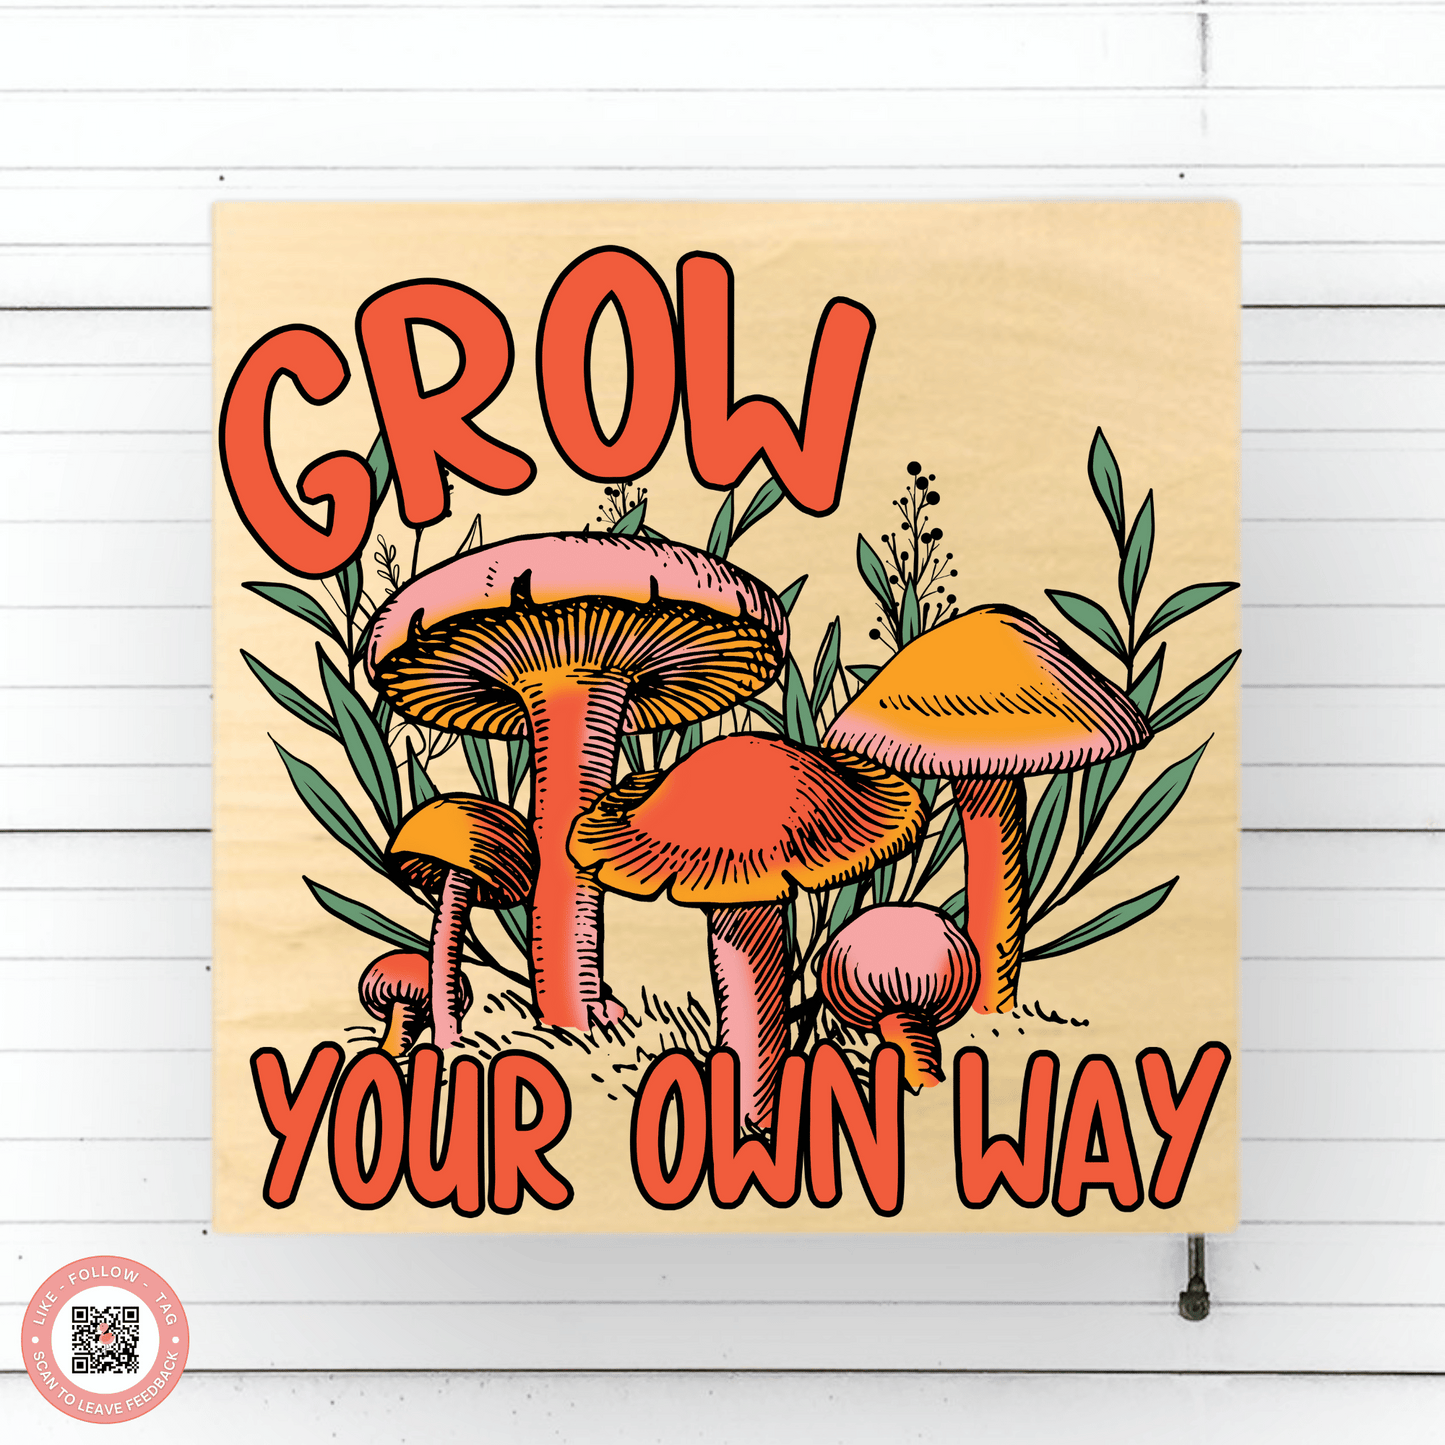 12" Square Wood Retro Grow Your Own Way Mushrooms Sign - Vintage-Inspired Wall Decor